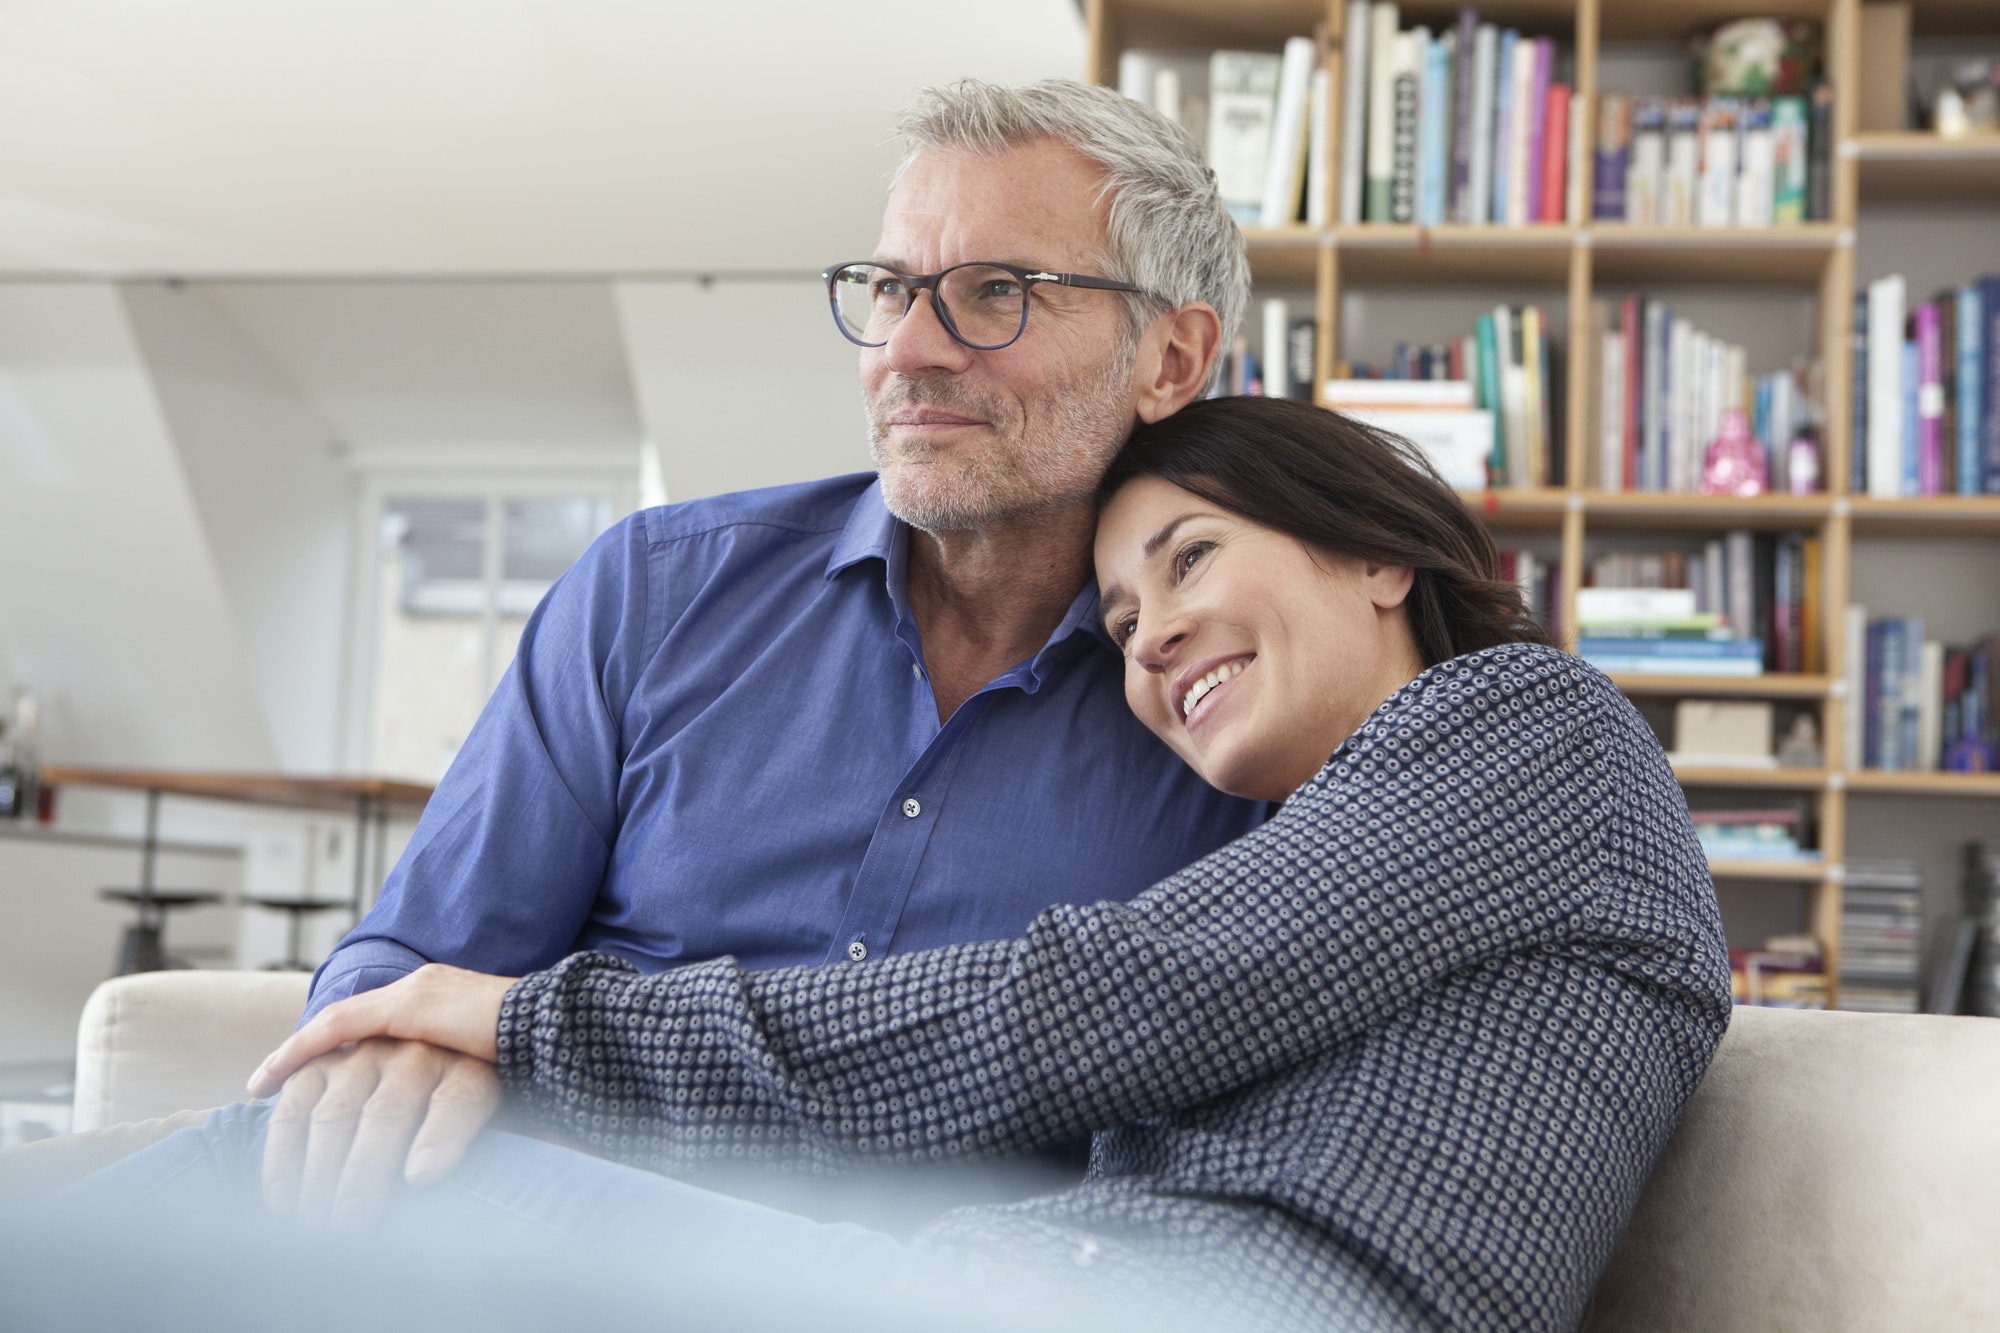 Smiling mature couple cuddling at home